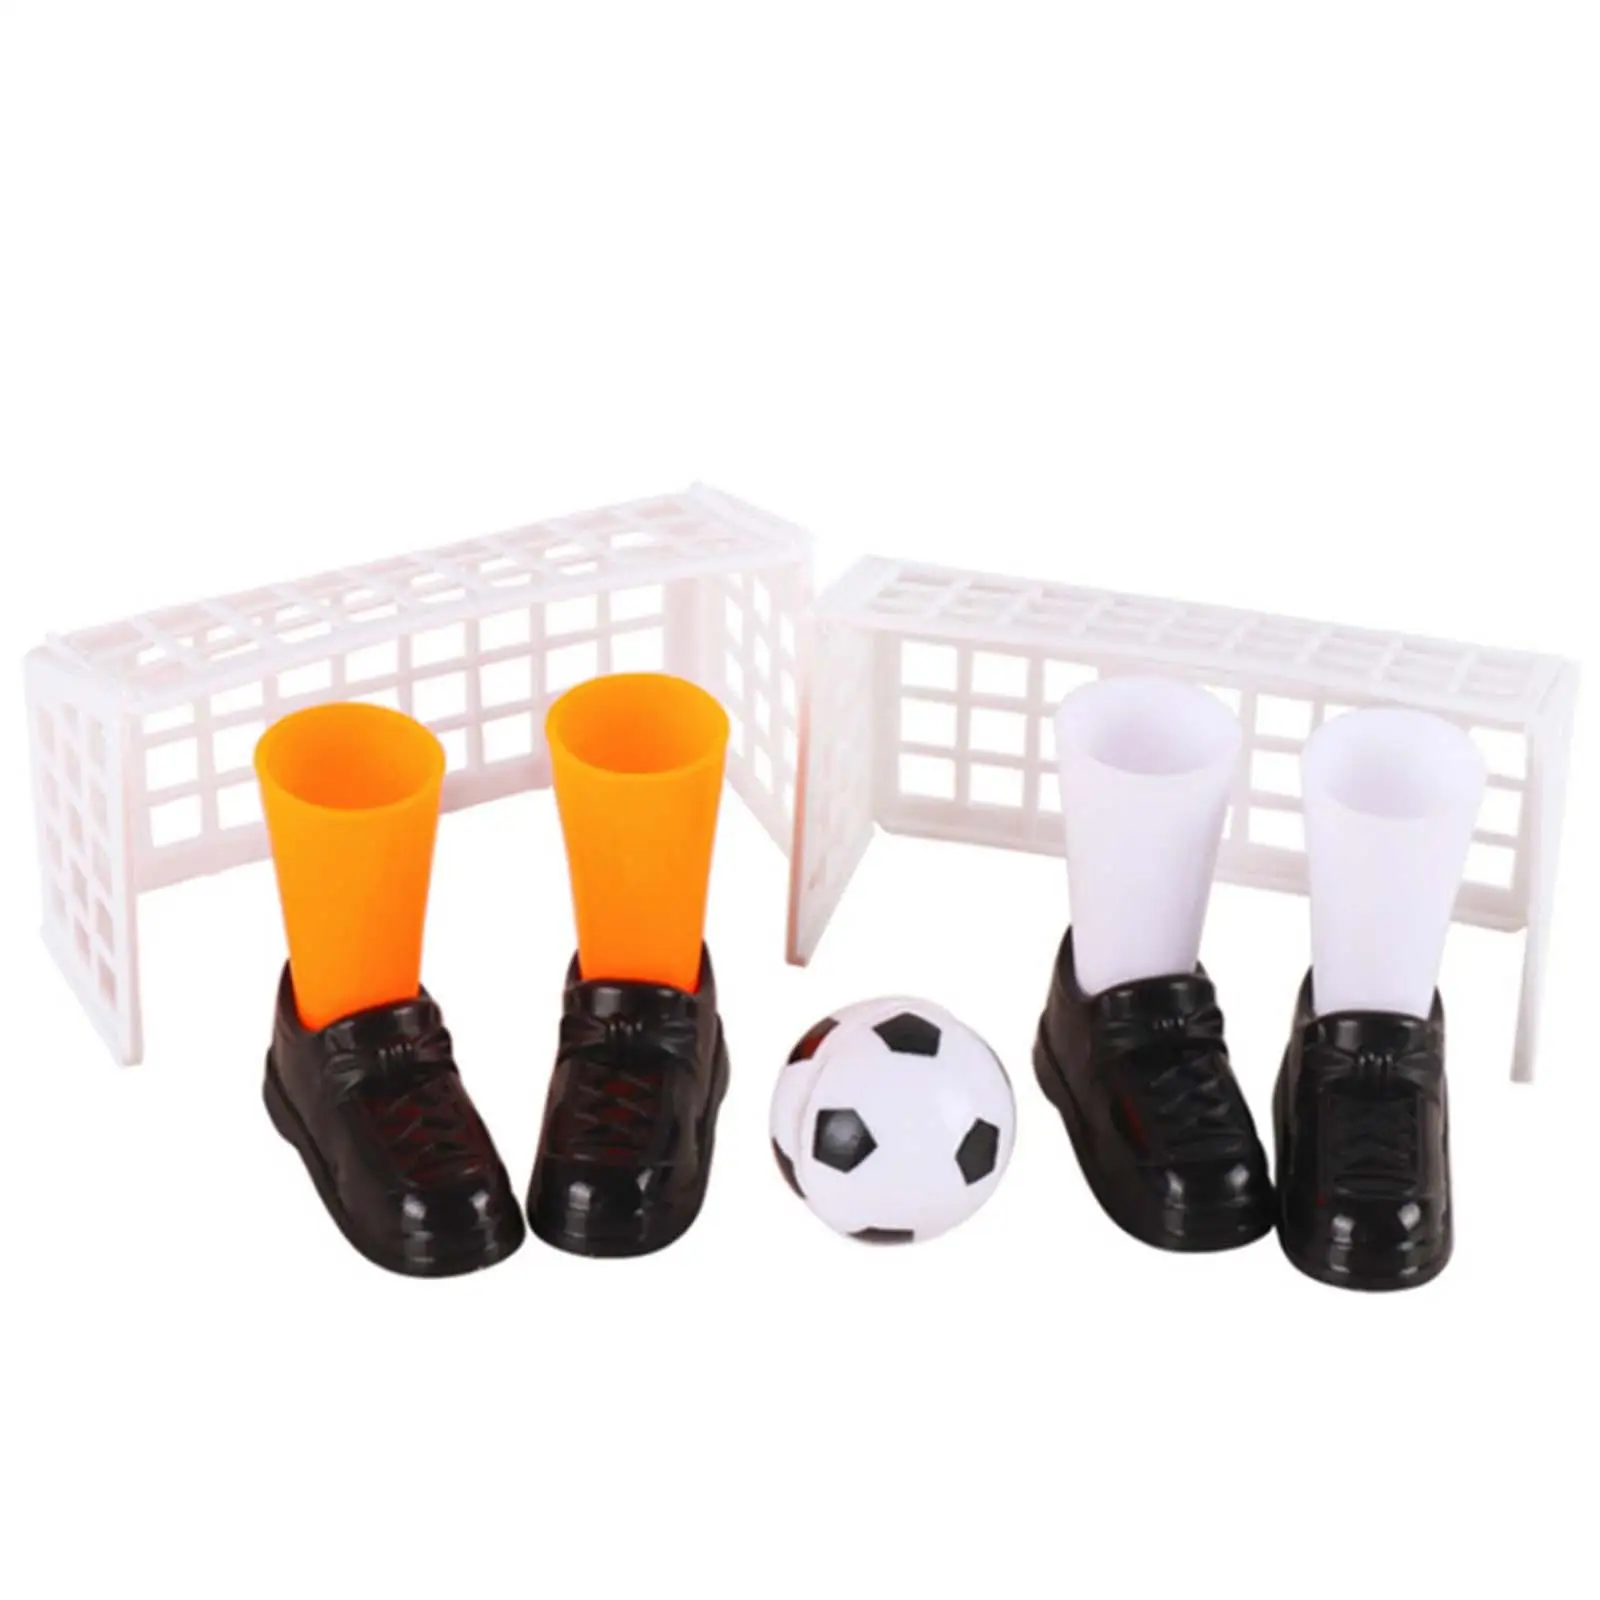 Set of Table Finger Football Game Interactive Toy Parent Child Interactive Toy Indoor Desktop Football Board Games Kit for Girls